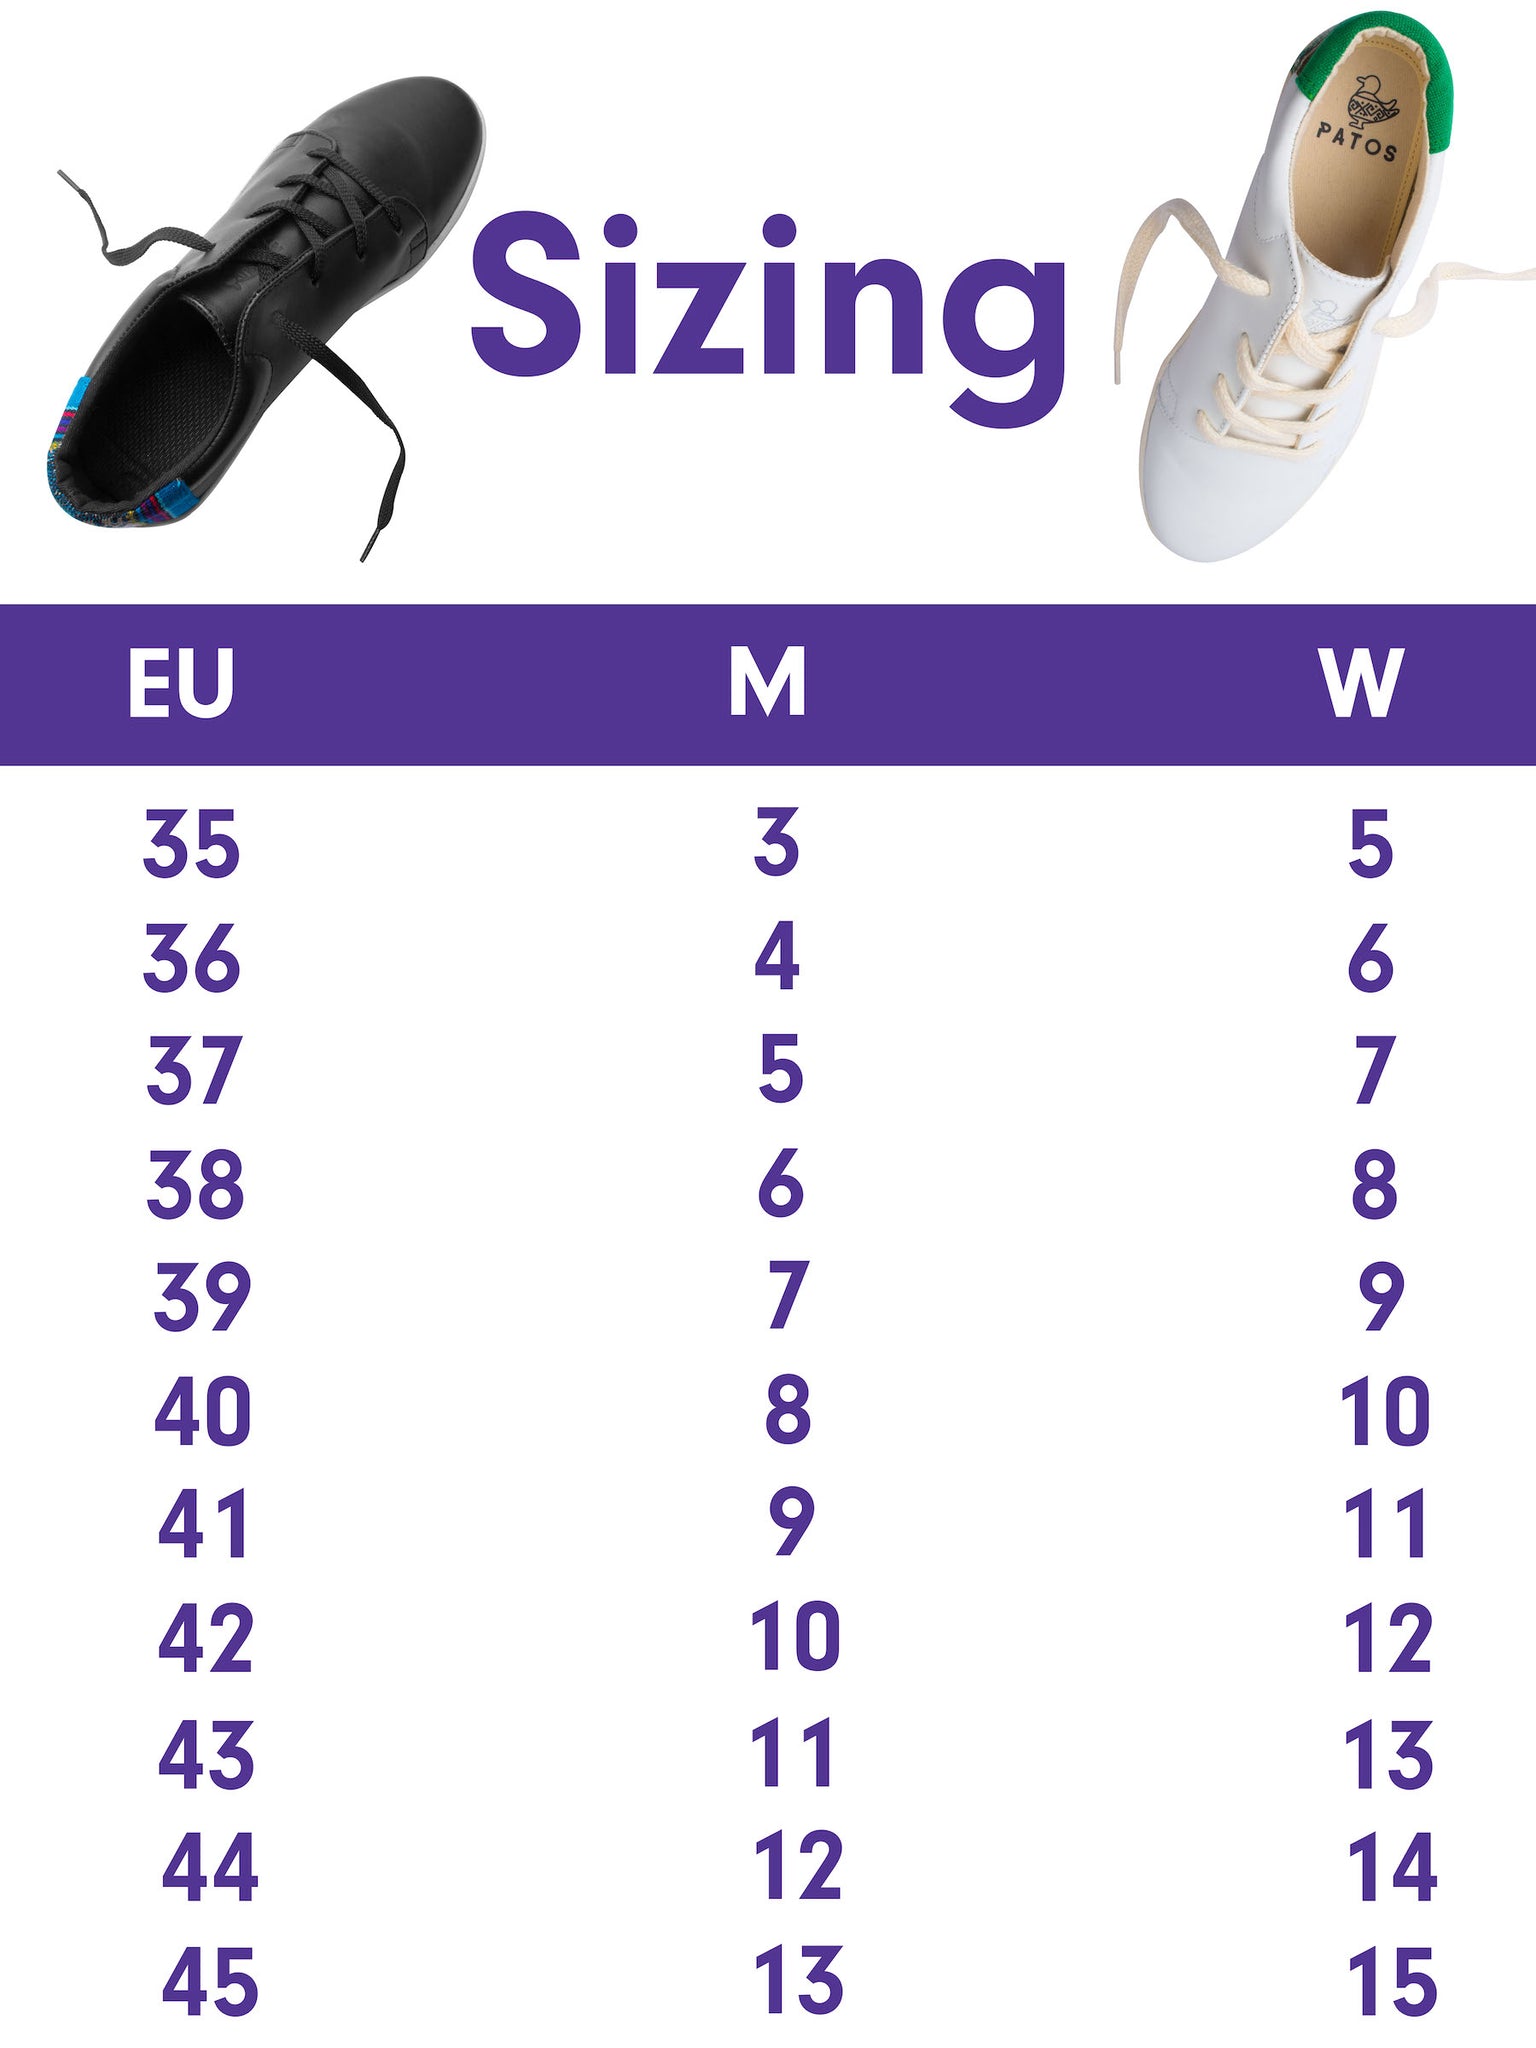 PATOS Shoes sizing chart